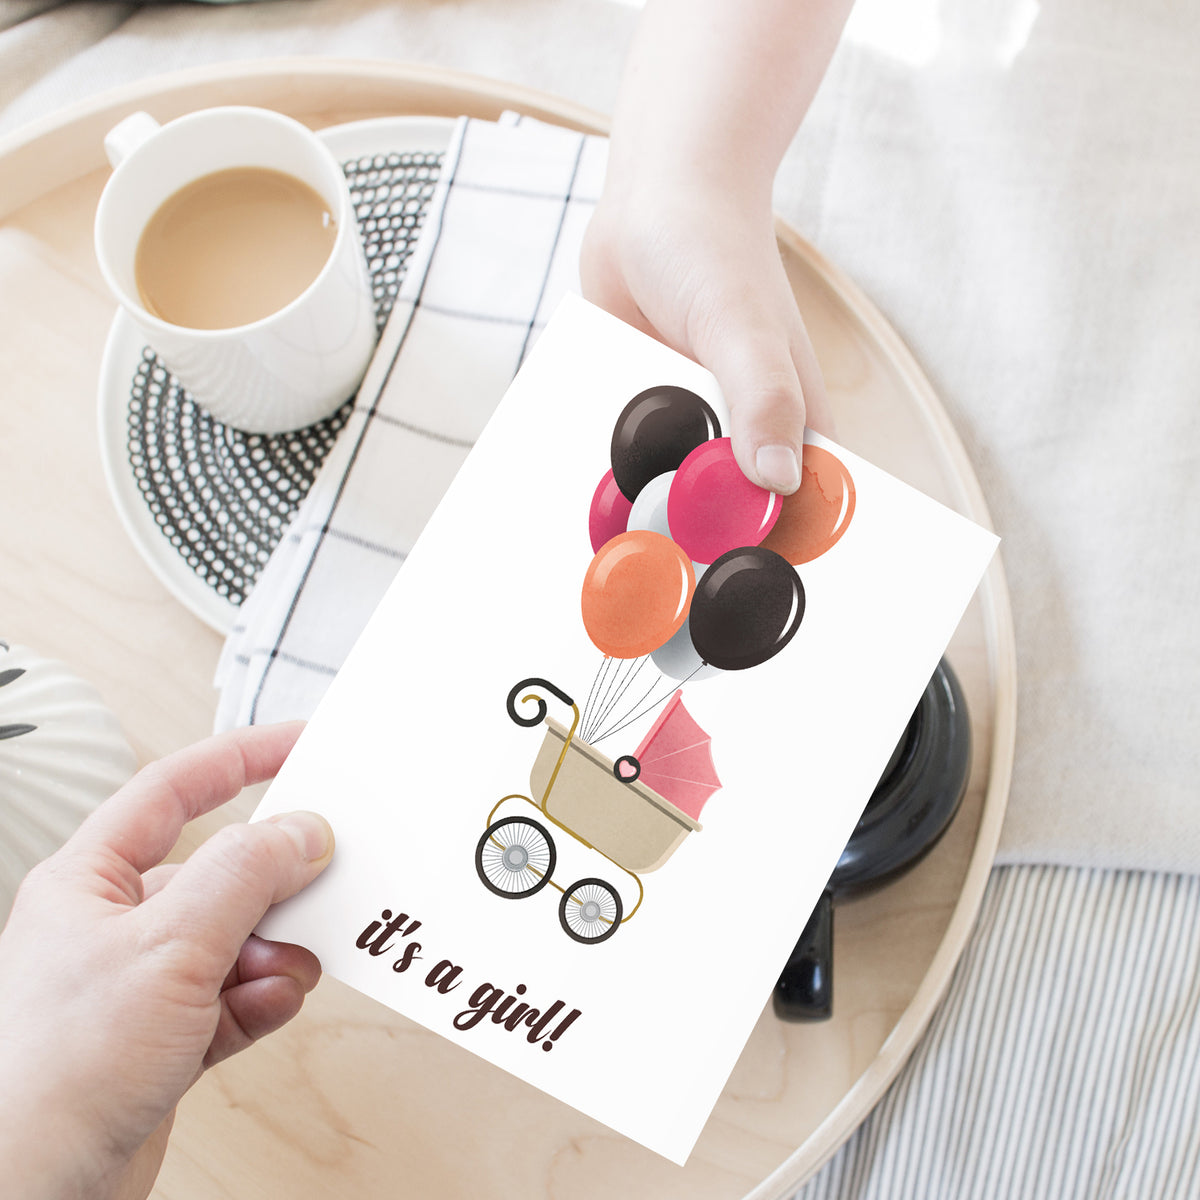 It's A Girl! – Pink Stroller & Balloons – Baby Shower Greeting Cards for New Mom Dad Parents, Welcome New Baby, Congrats, Gender Reveal – 10 per Pack